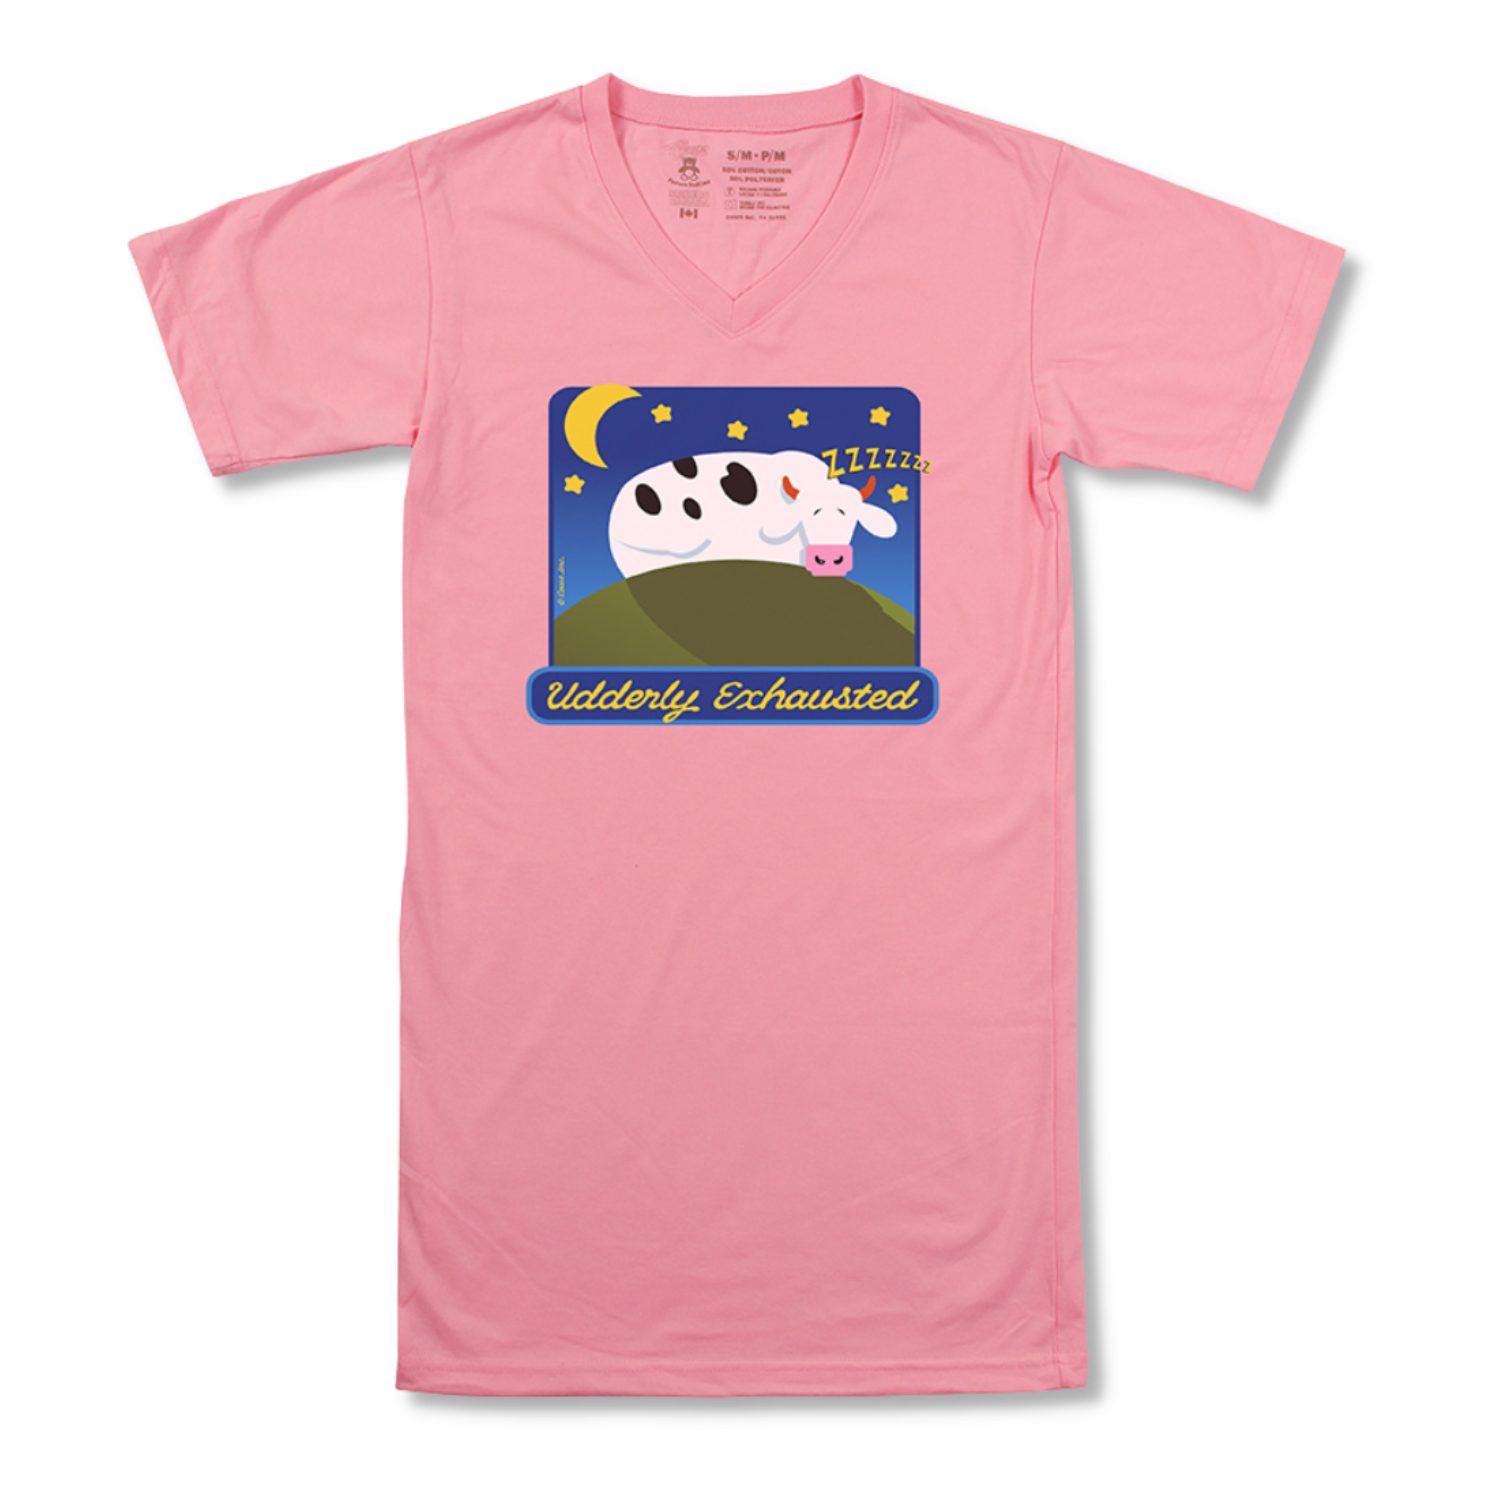 UDDERly Exhausted T-Nightshirt